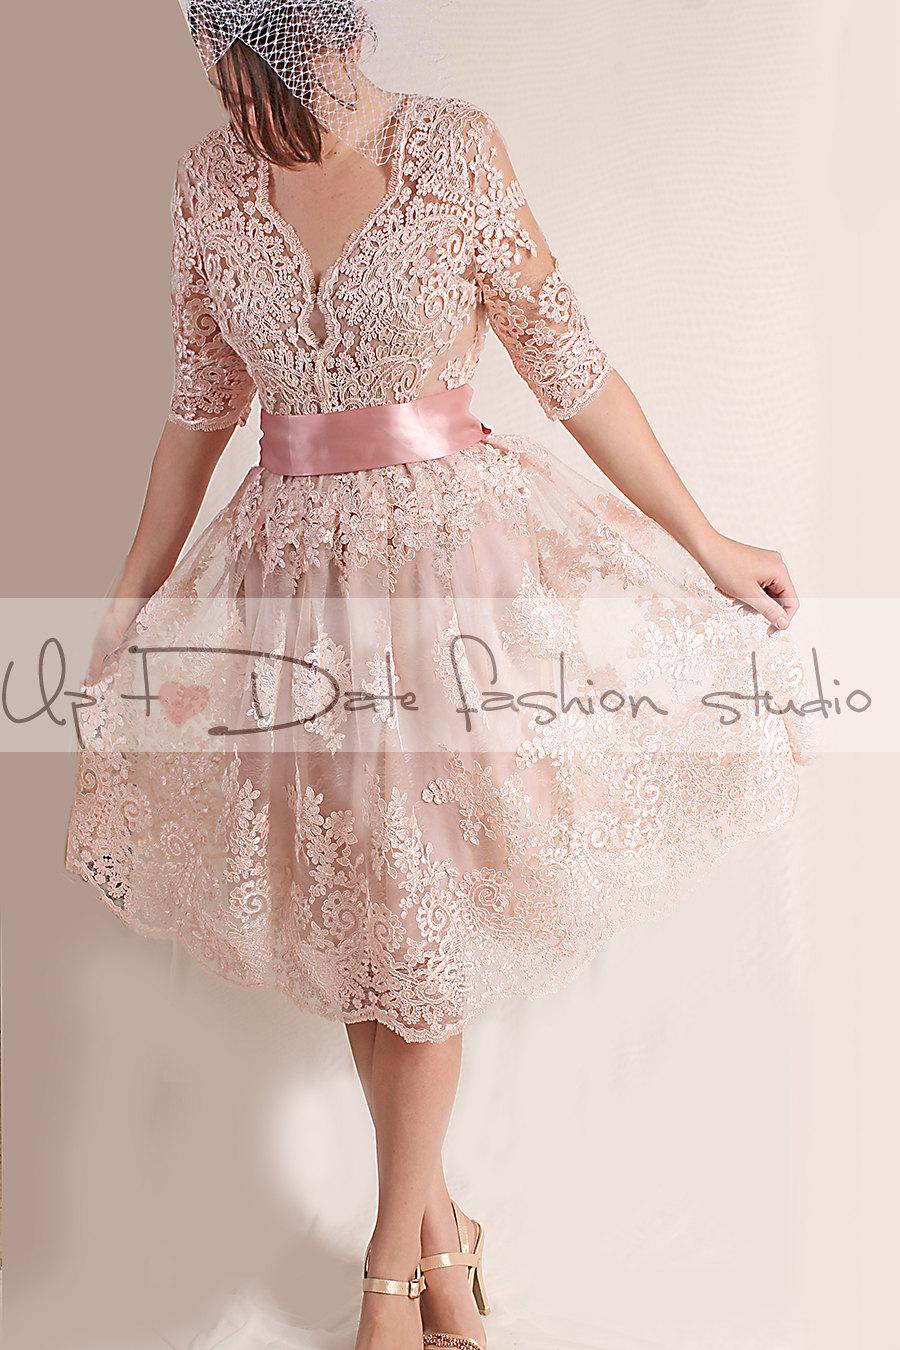 Wedding - Party/Cocktail /evening/knee length /alencon lace dress/open back/ blush pink dress